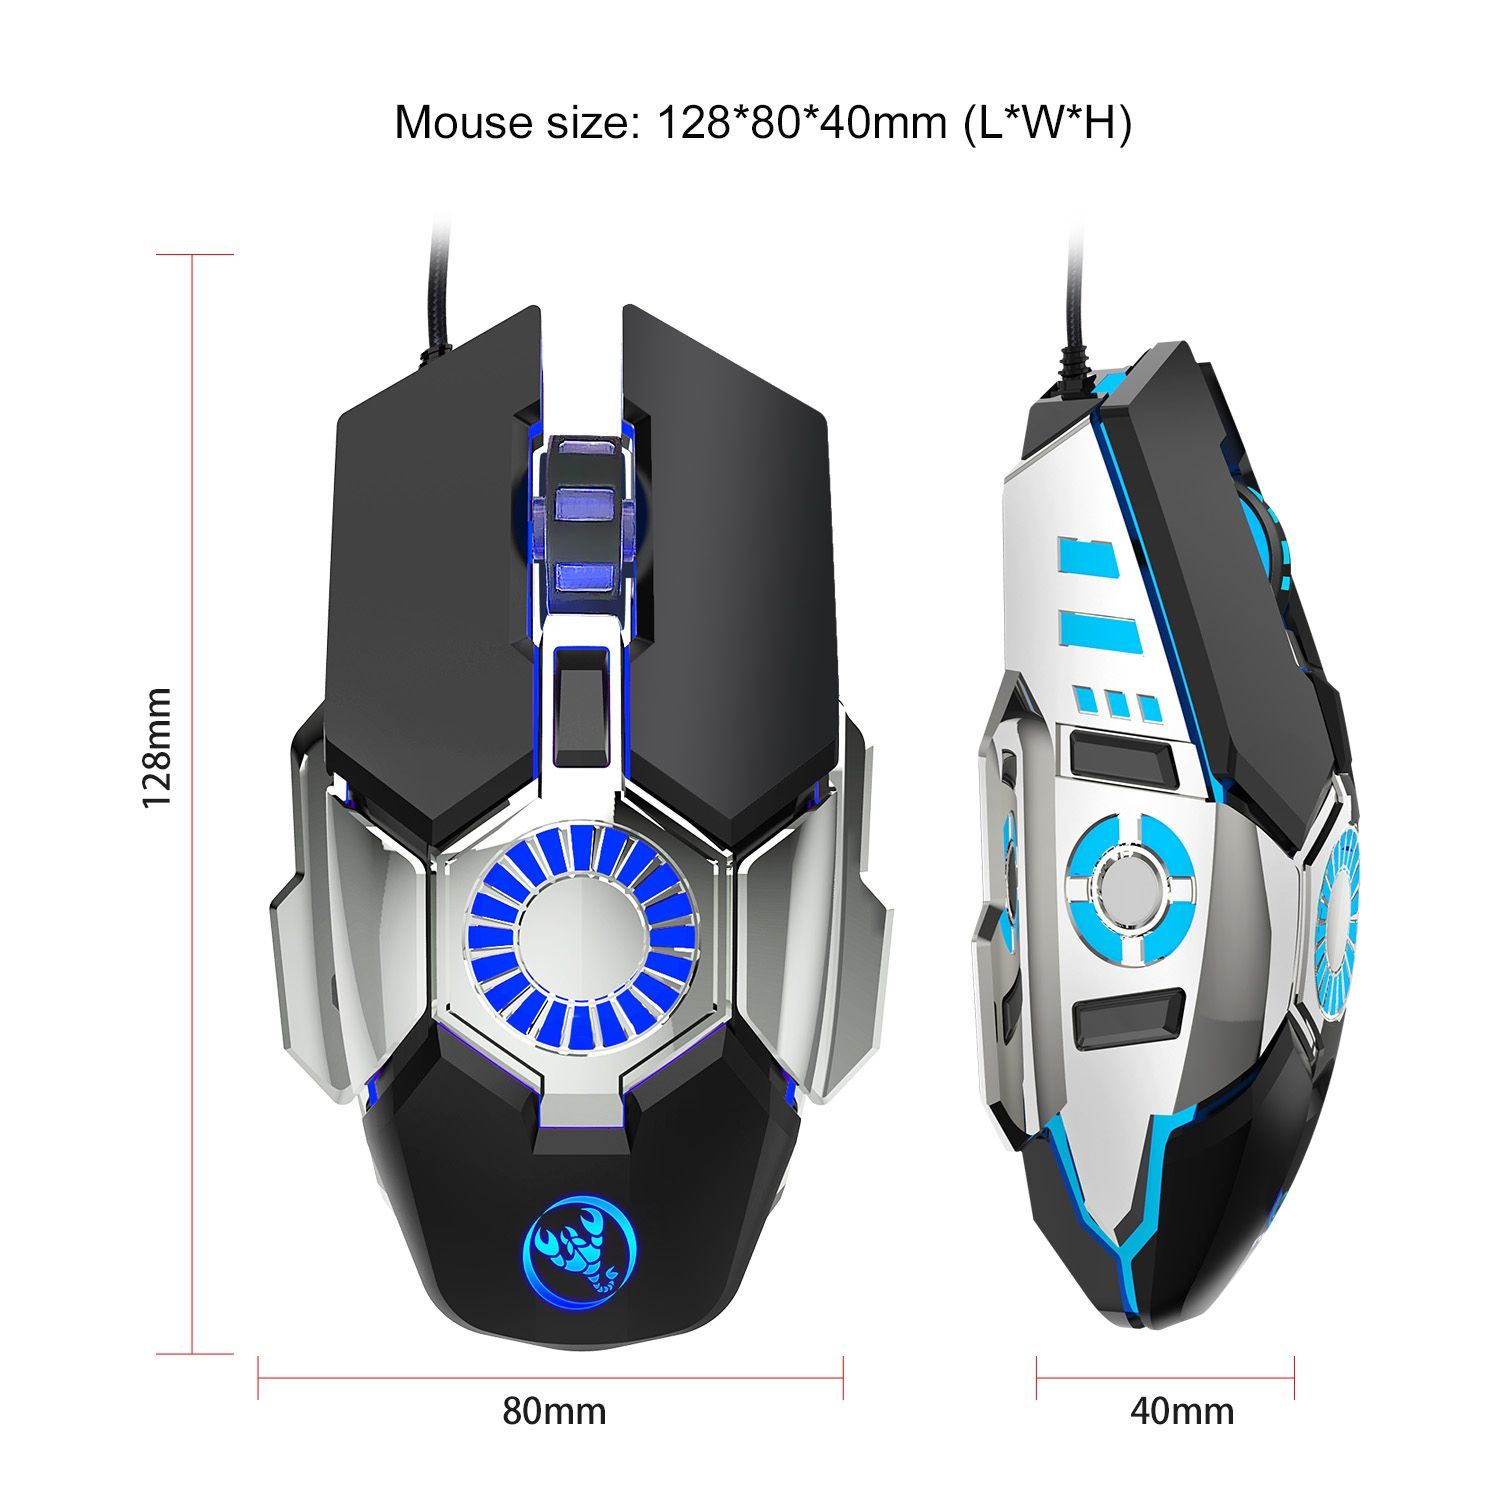 HXSJ-V700-Wired-Gaming-Mouse-6-Buttons-Macro-Programming-Mouse-Four-Speed-6400DPI-Colorful-RGB-Backl-1747809